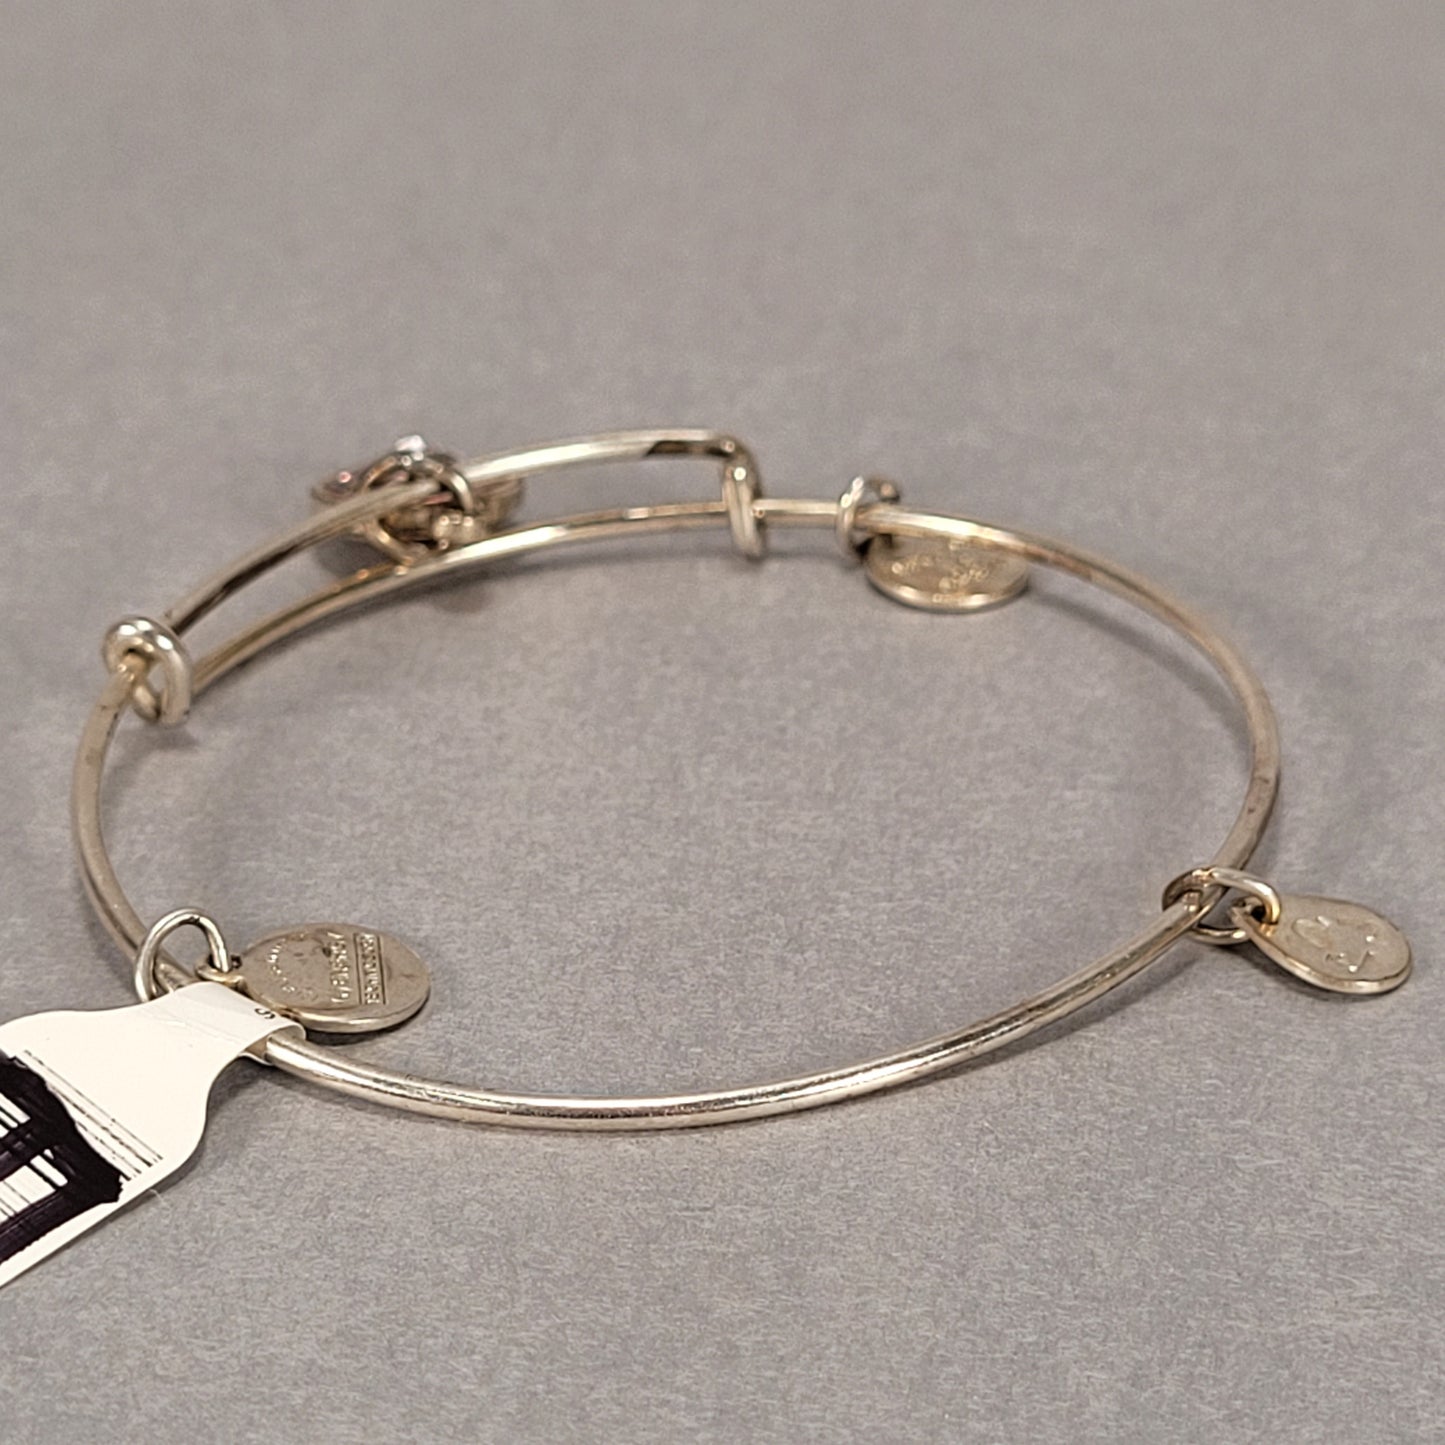 Alex & Ani Sterling Silver Bracelet With Pink Stone And Sterling Charms